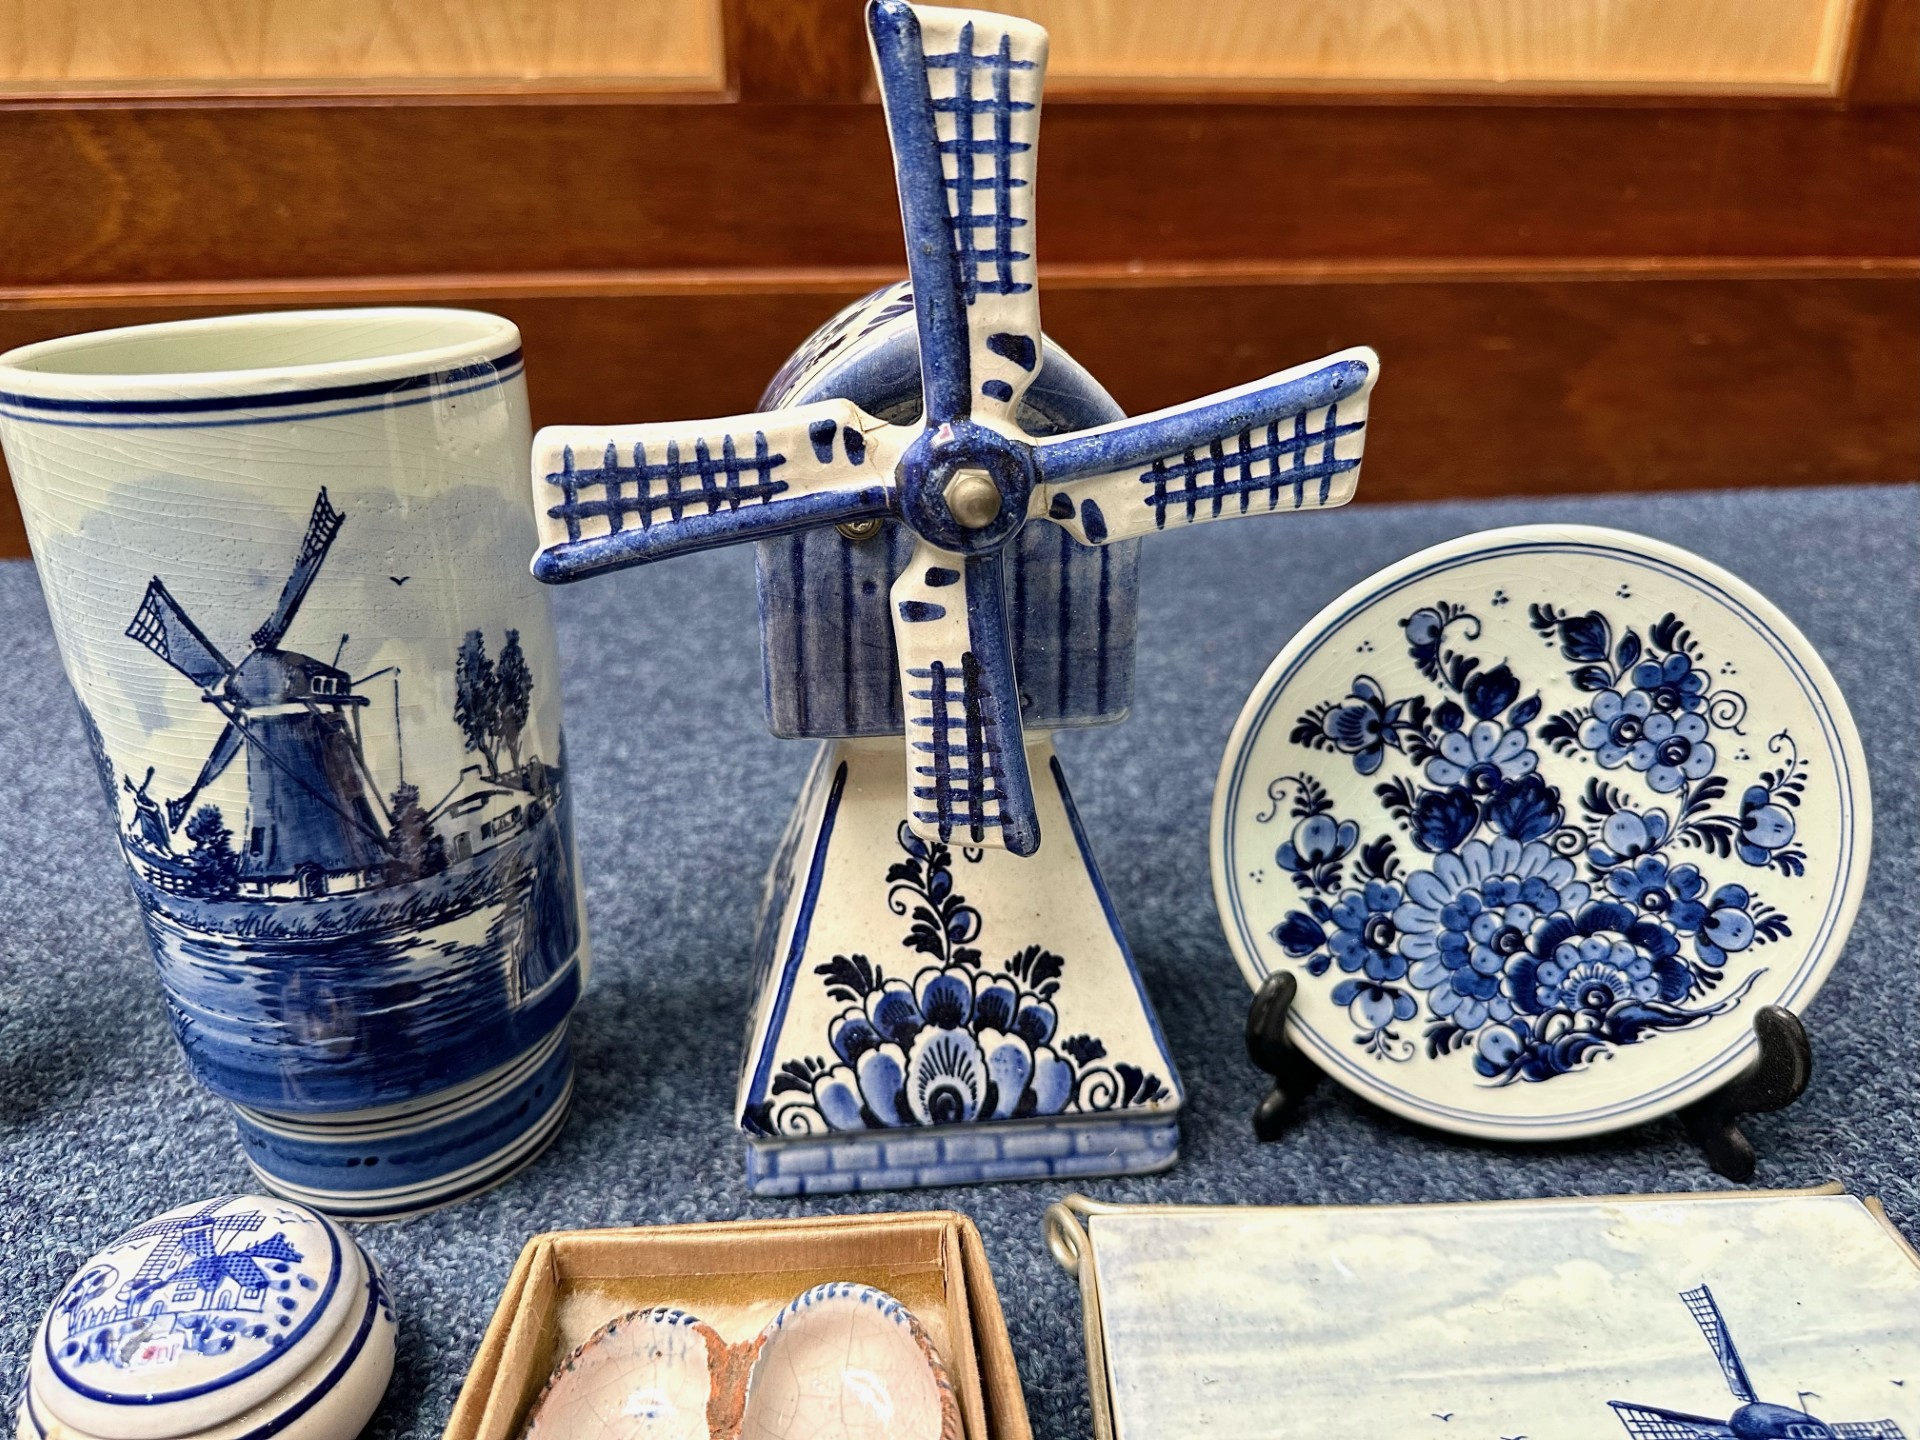 Collection of Delft Dutch Blue & White Pottery, including a large windmill, vase, clogs, trinket - Image 2 of 3